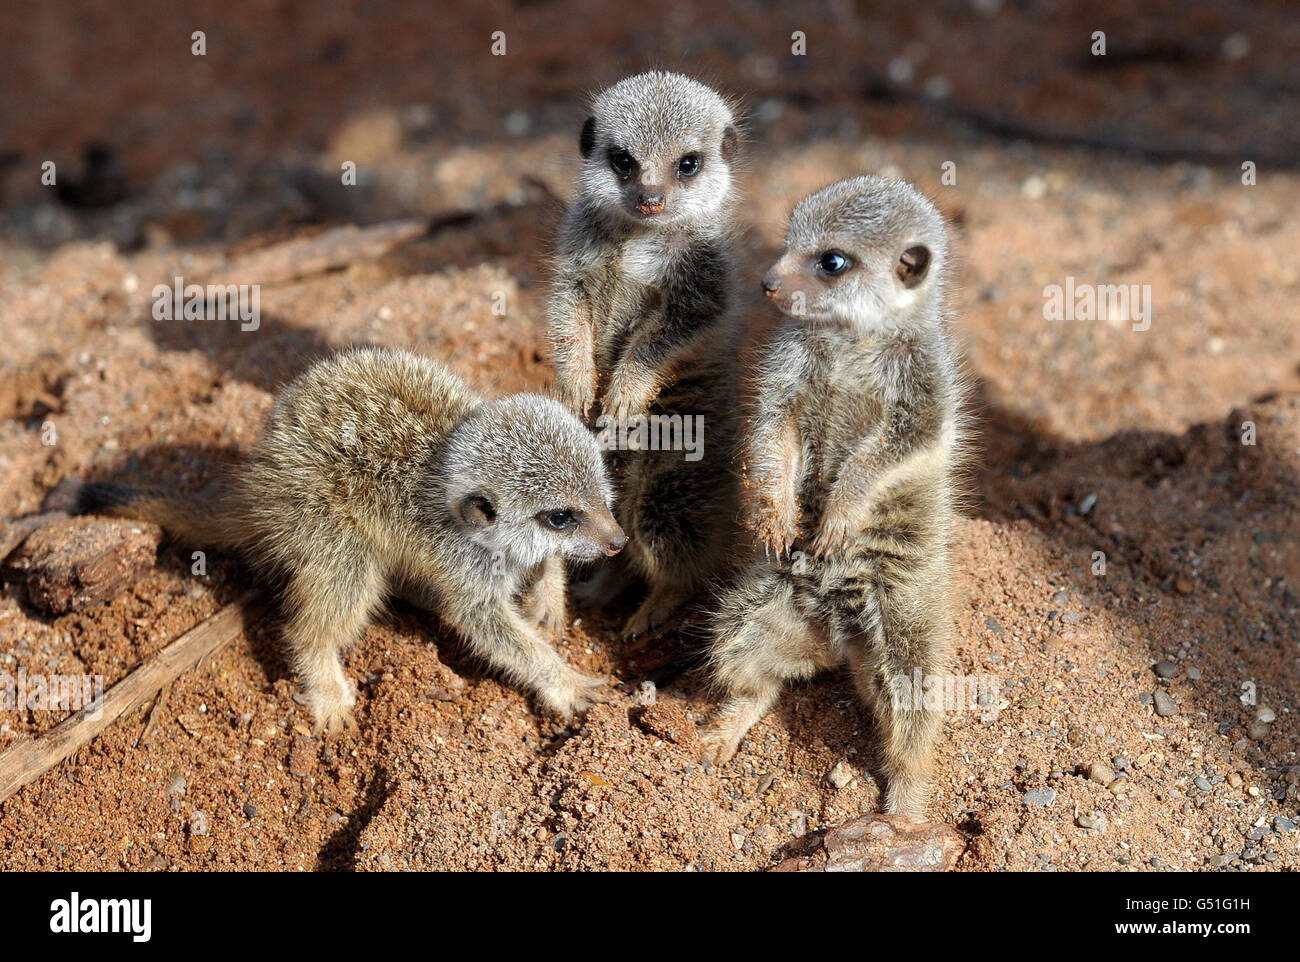 Three baby meerkats, named Timon, Pumbaa and Rafiki, after characters from the Disney film The Lion King, at Bristol Zoo Gardens. Stock Photo